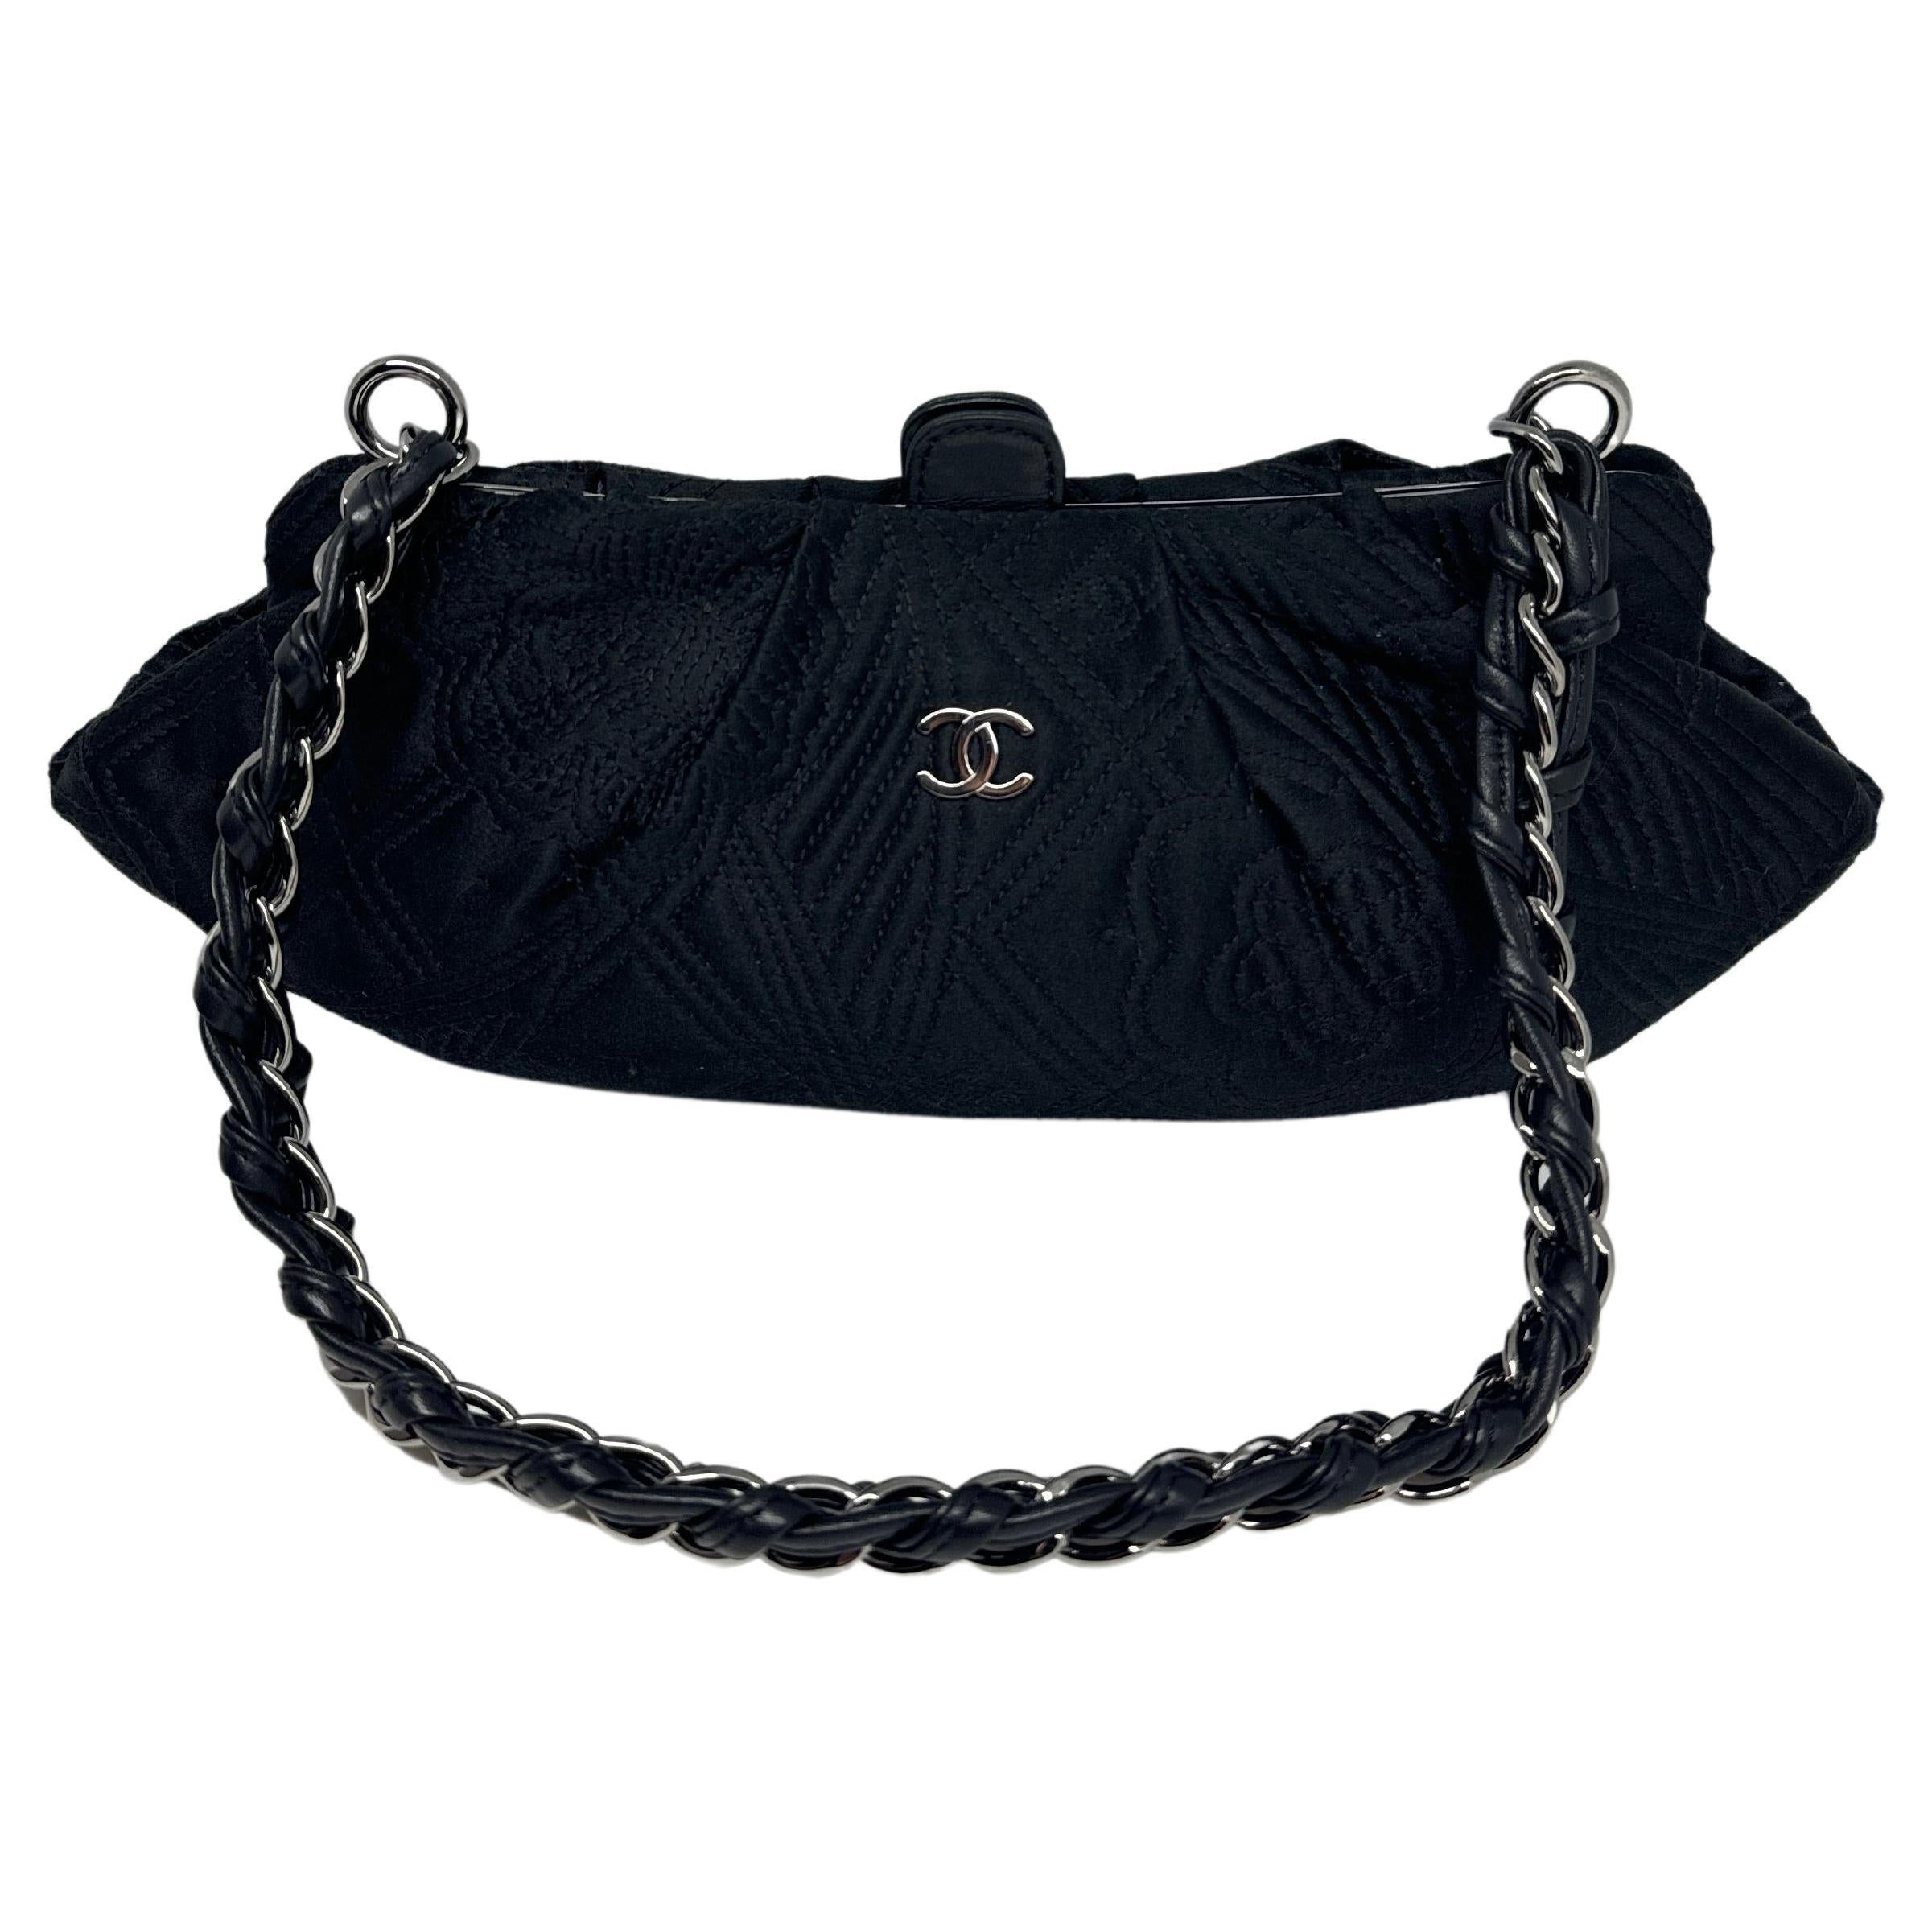 Chanel Black Satin Quilted Evening Bag For Sale